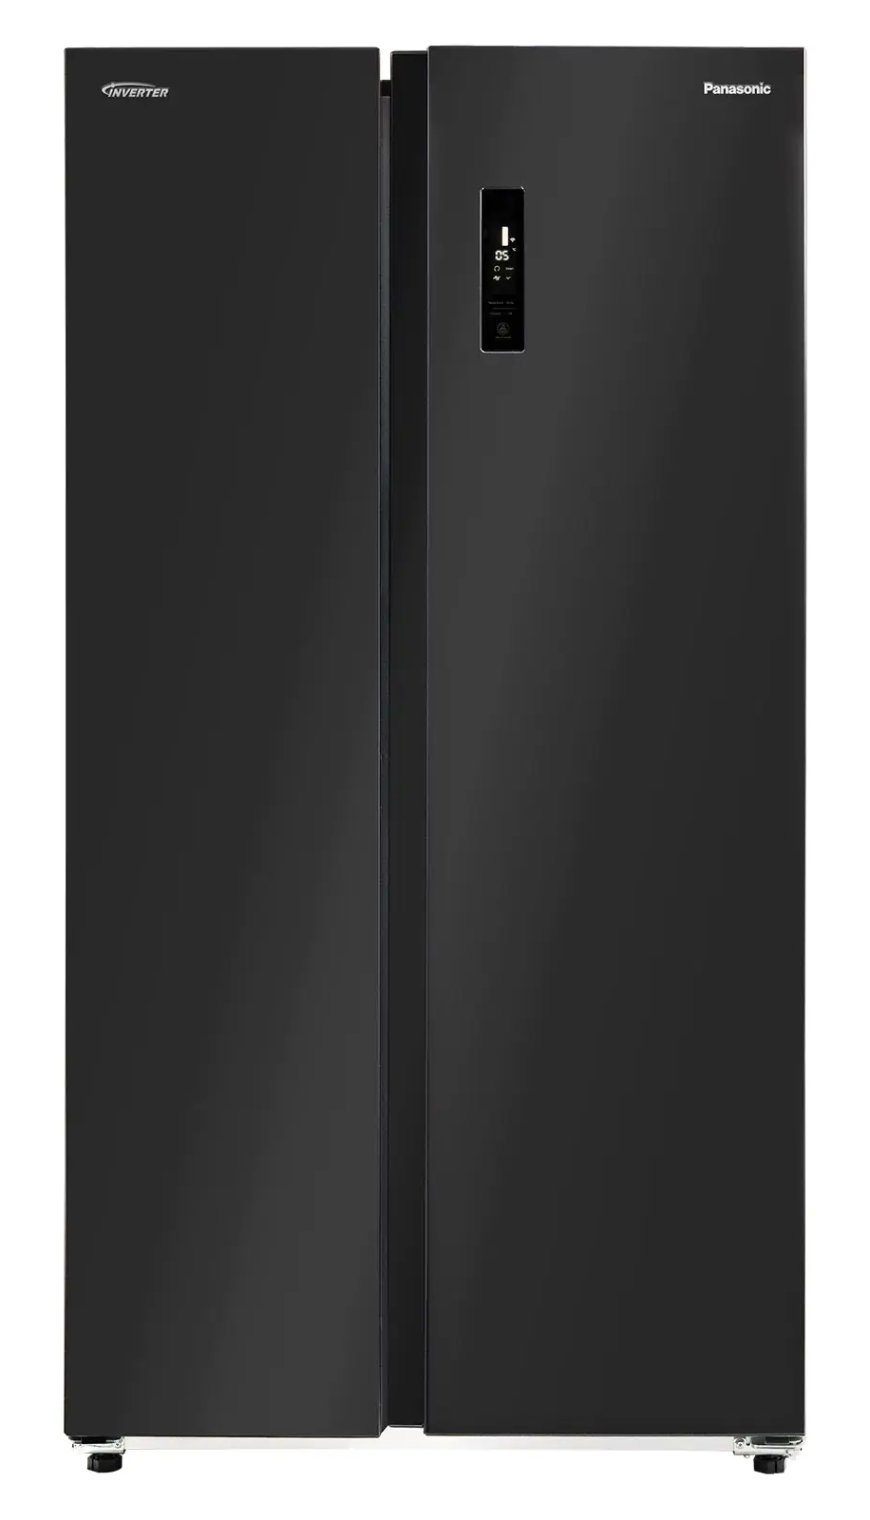 Panasonic 592 L Frost Free Side by Side Refrigerator (Black Class) At just Rs. 63,490 [MRP 1,05,000]